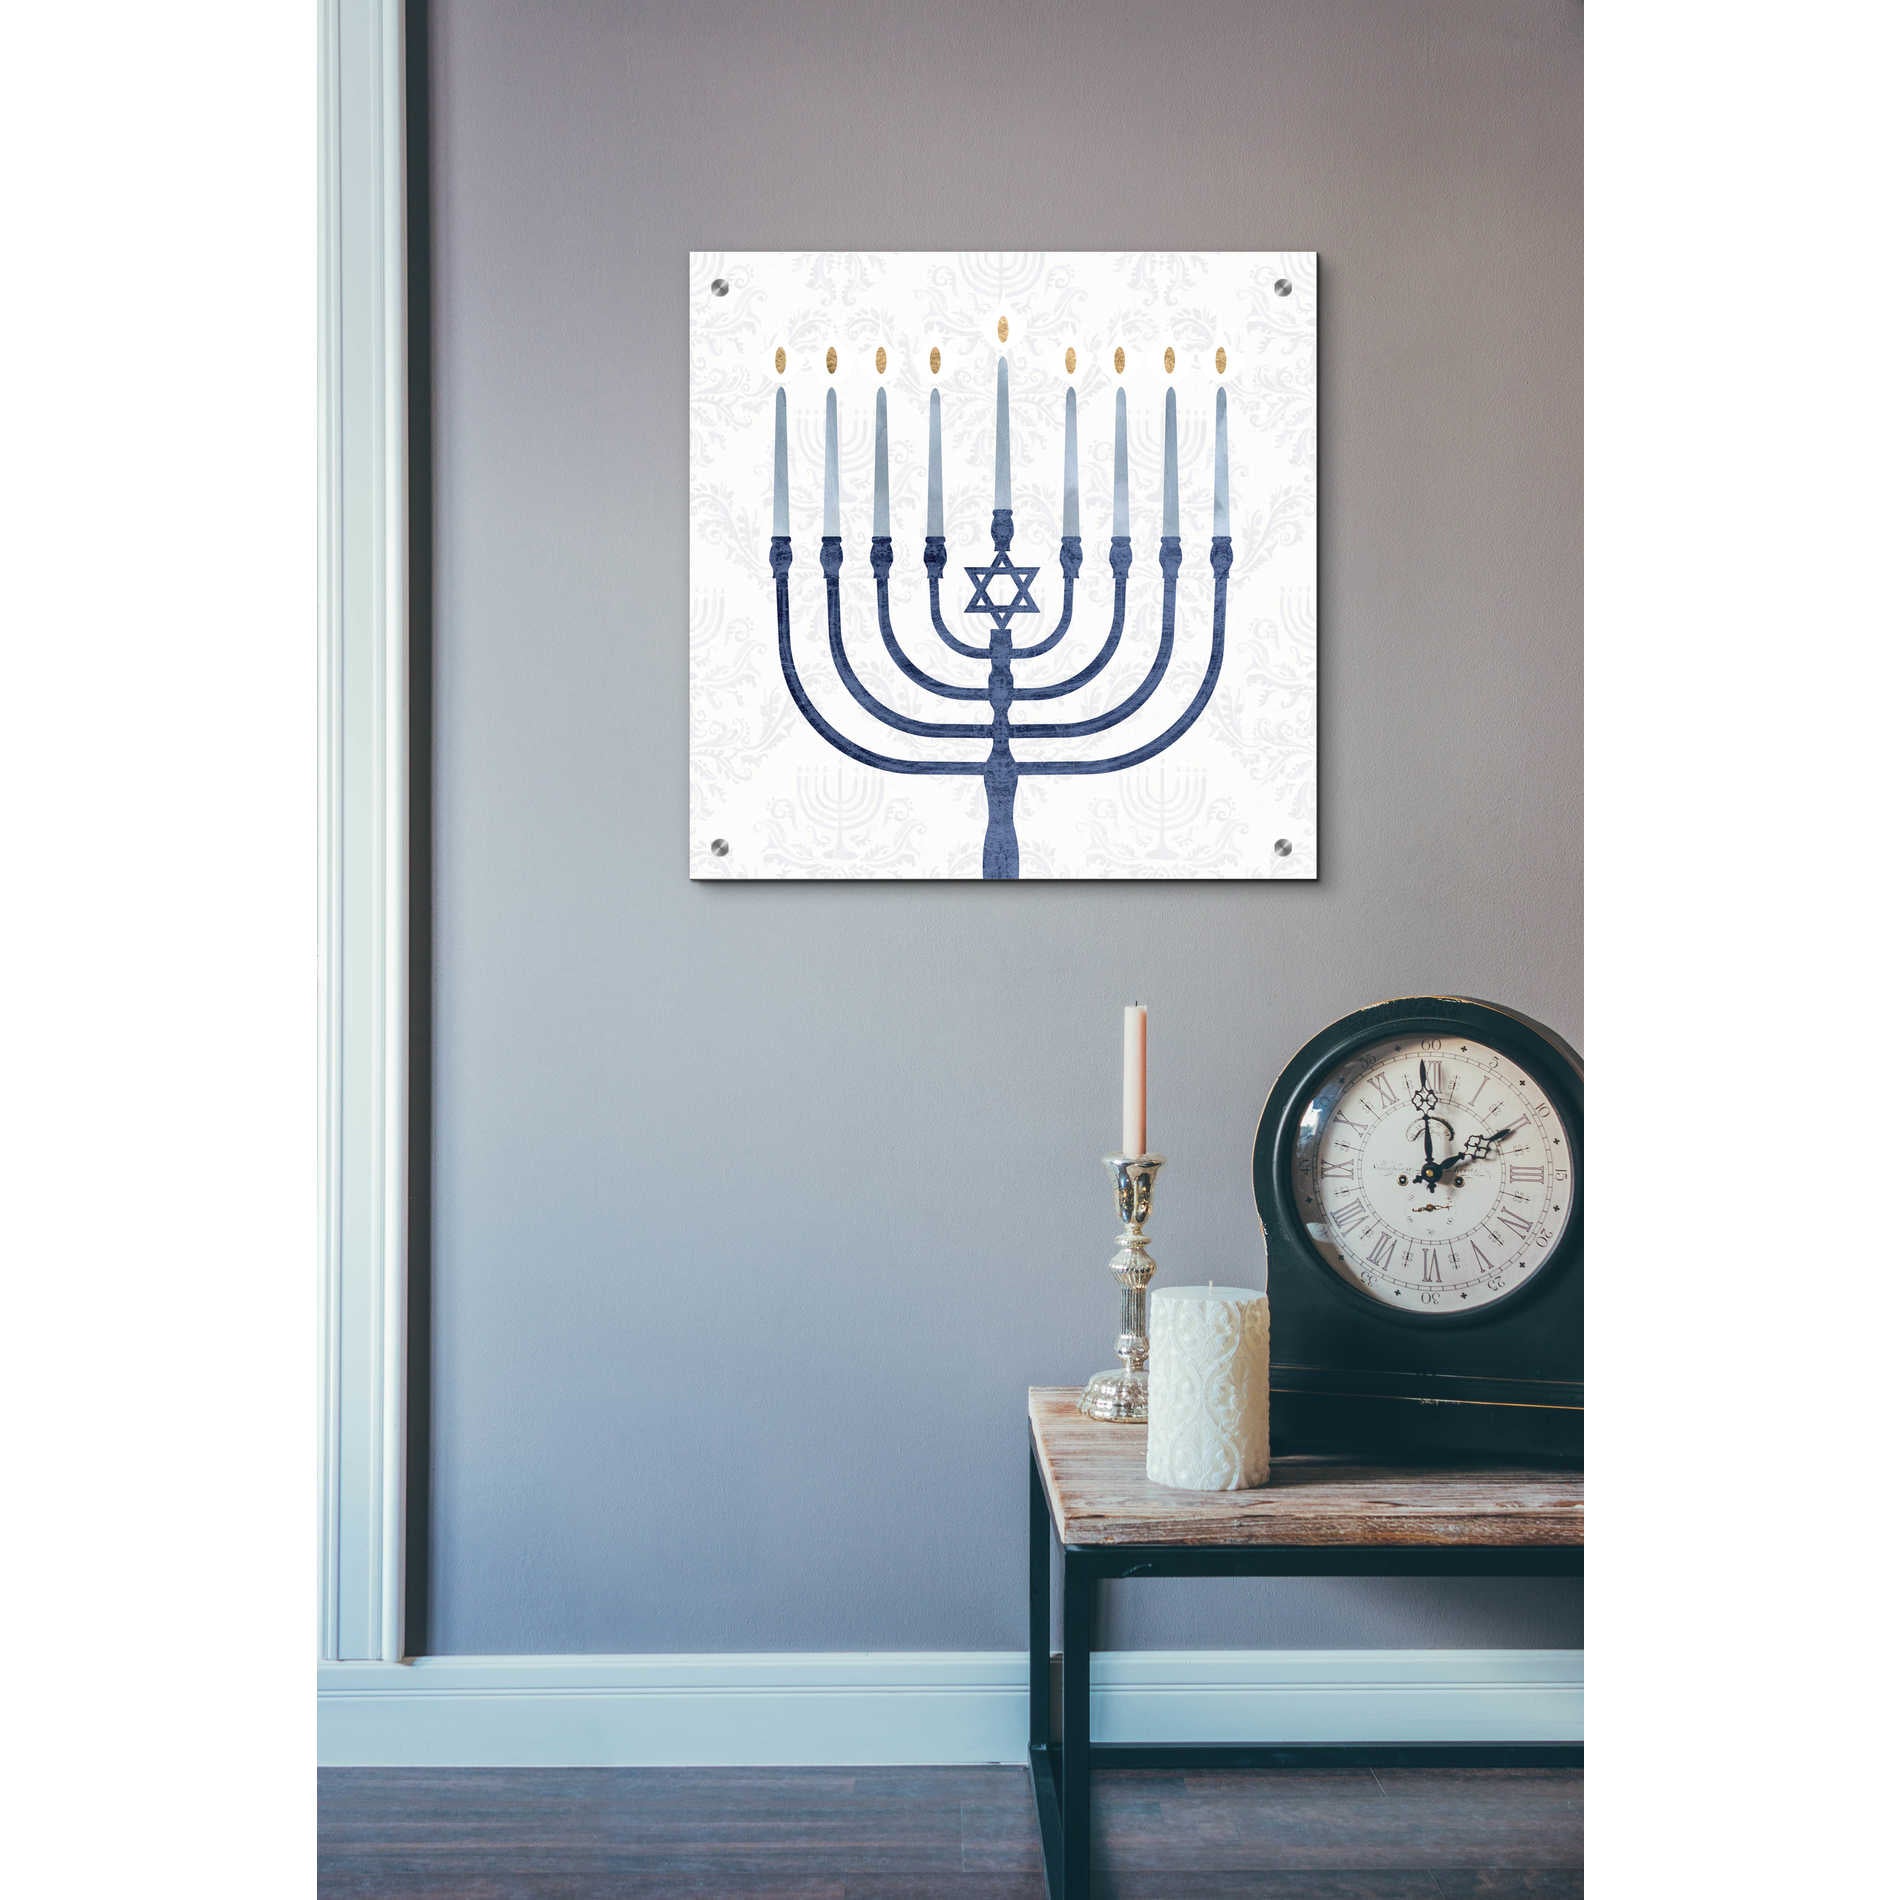 Epic Art 'Sophisticated Hanukkah II' by Victoria Borges, Acrylic Glass Wall Art,24x24